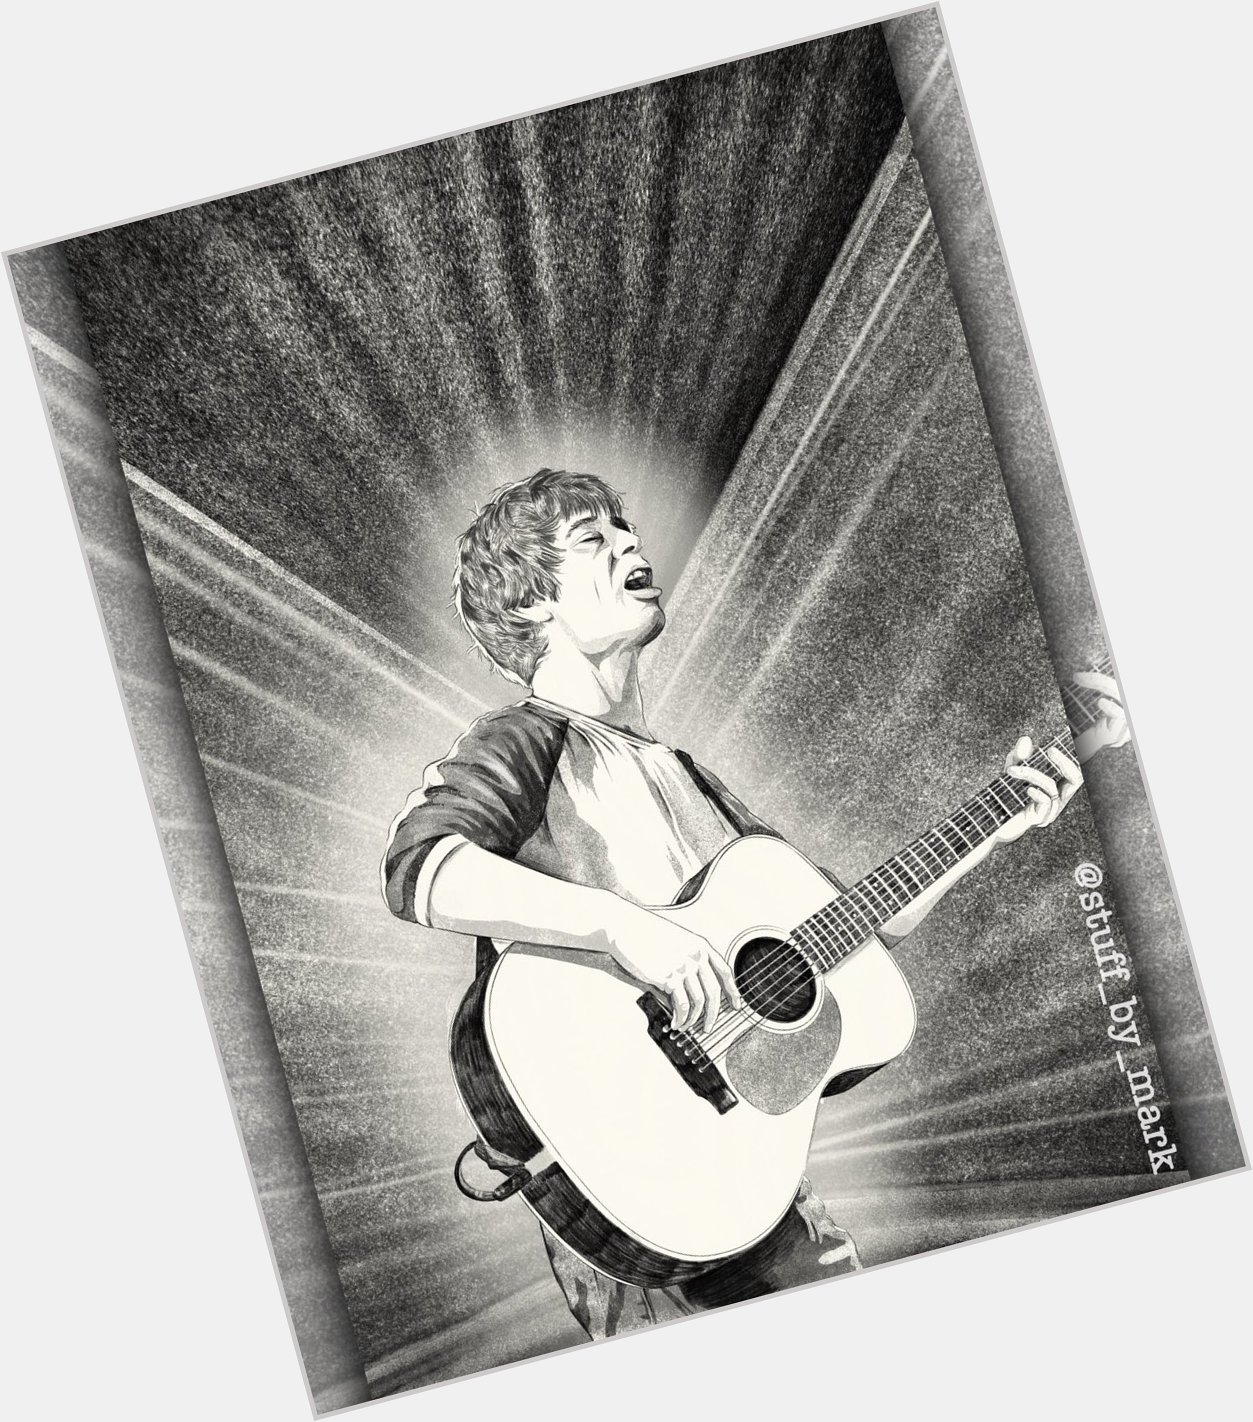 I finished off my Happy belated 60th Birthday to Lee Mavers from The La s drawing. 